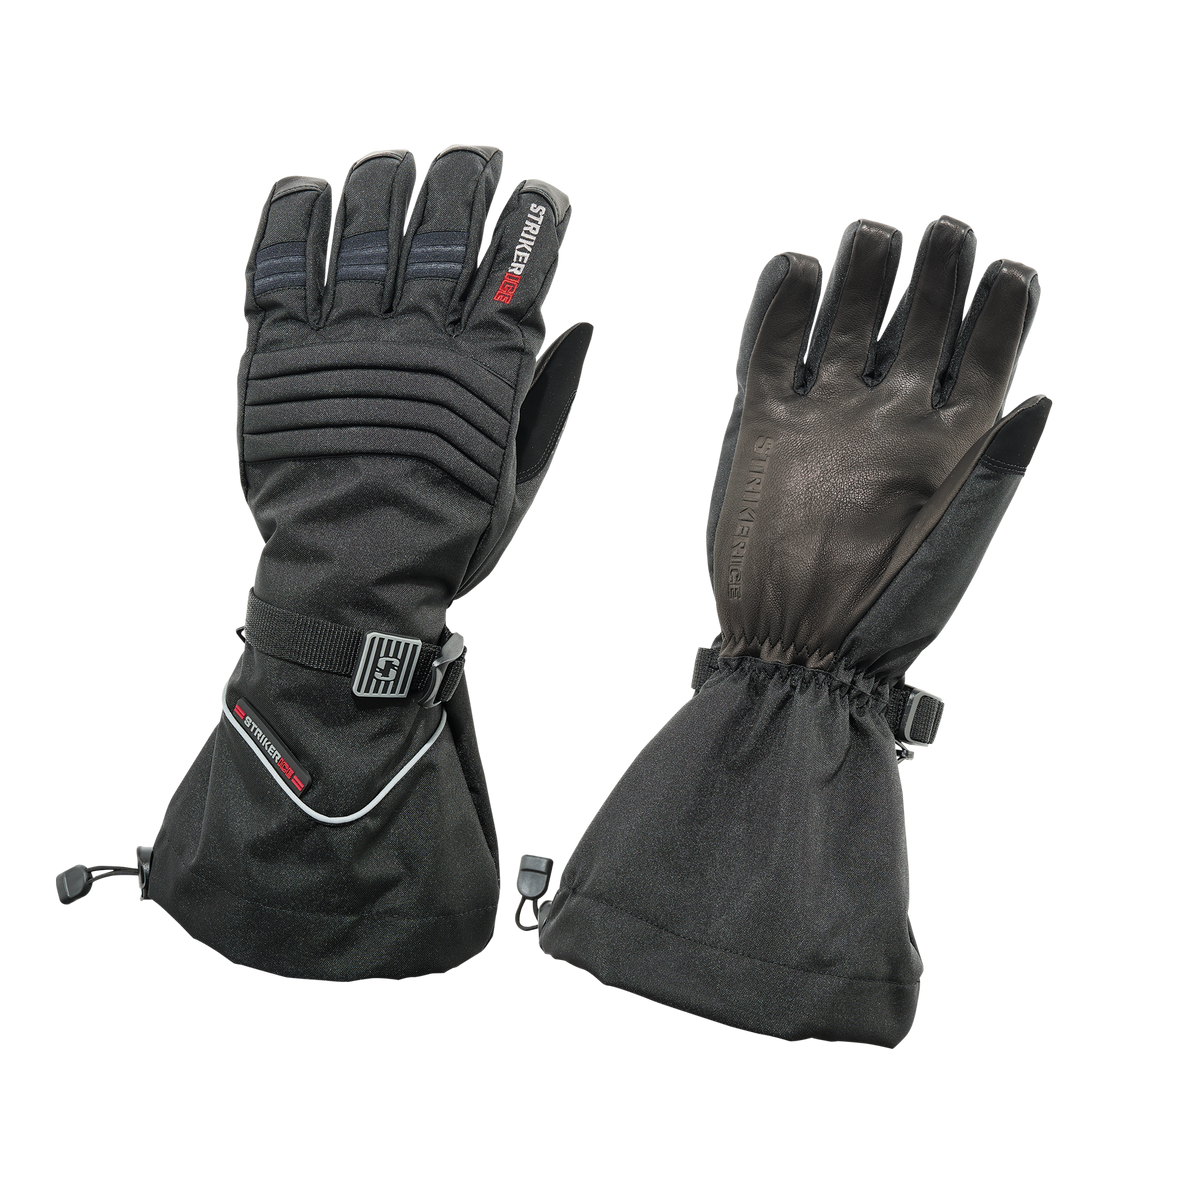 Striker Ice Combat Leather Gloves - Black - Small